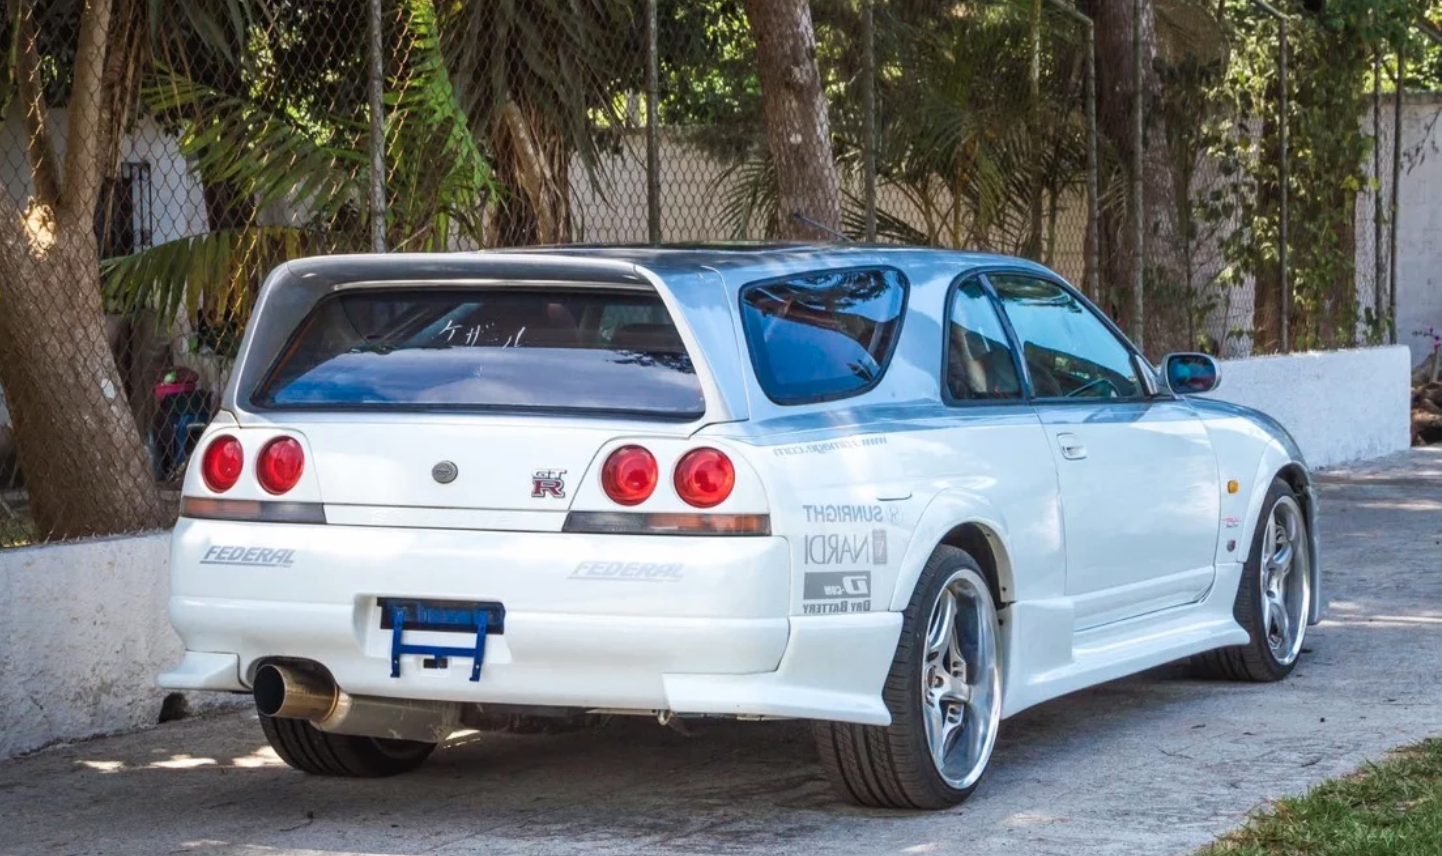 JDM Skyline converted into a station wagon called Speed Wagon rear 3/4 view